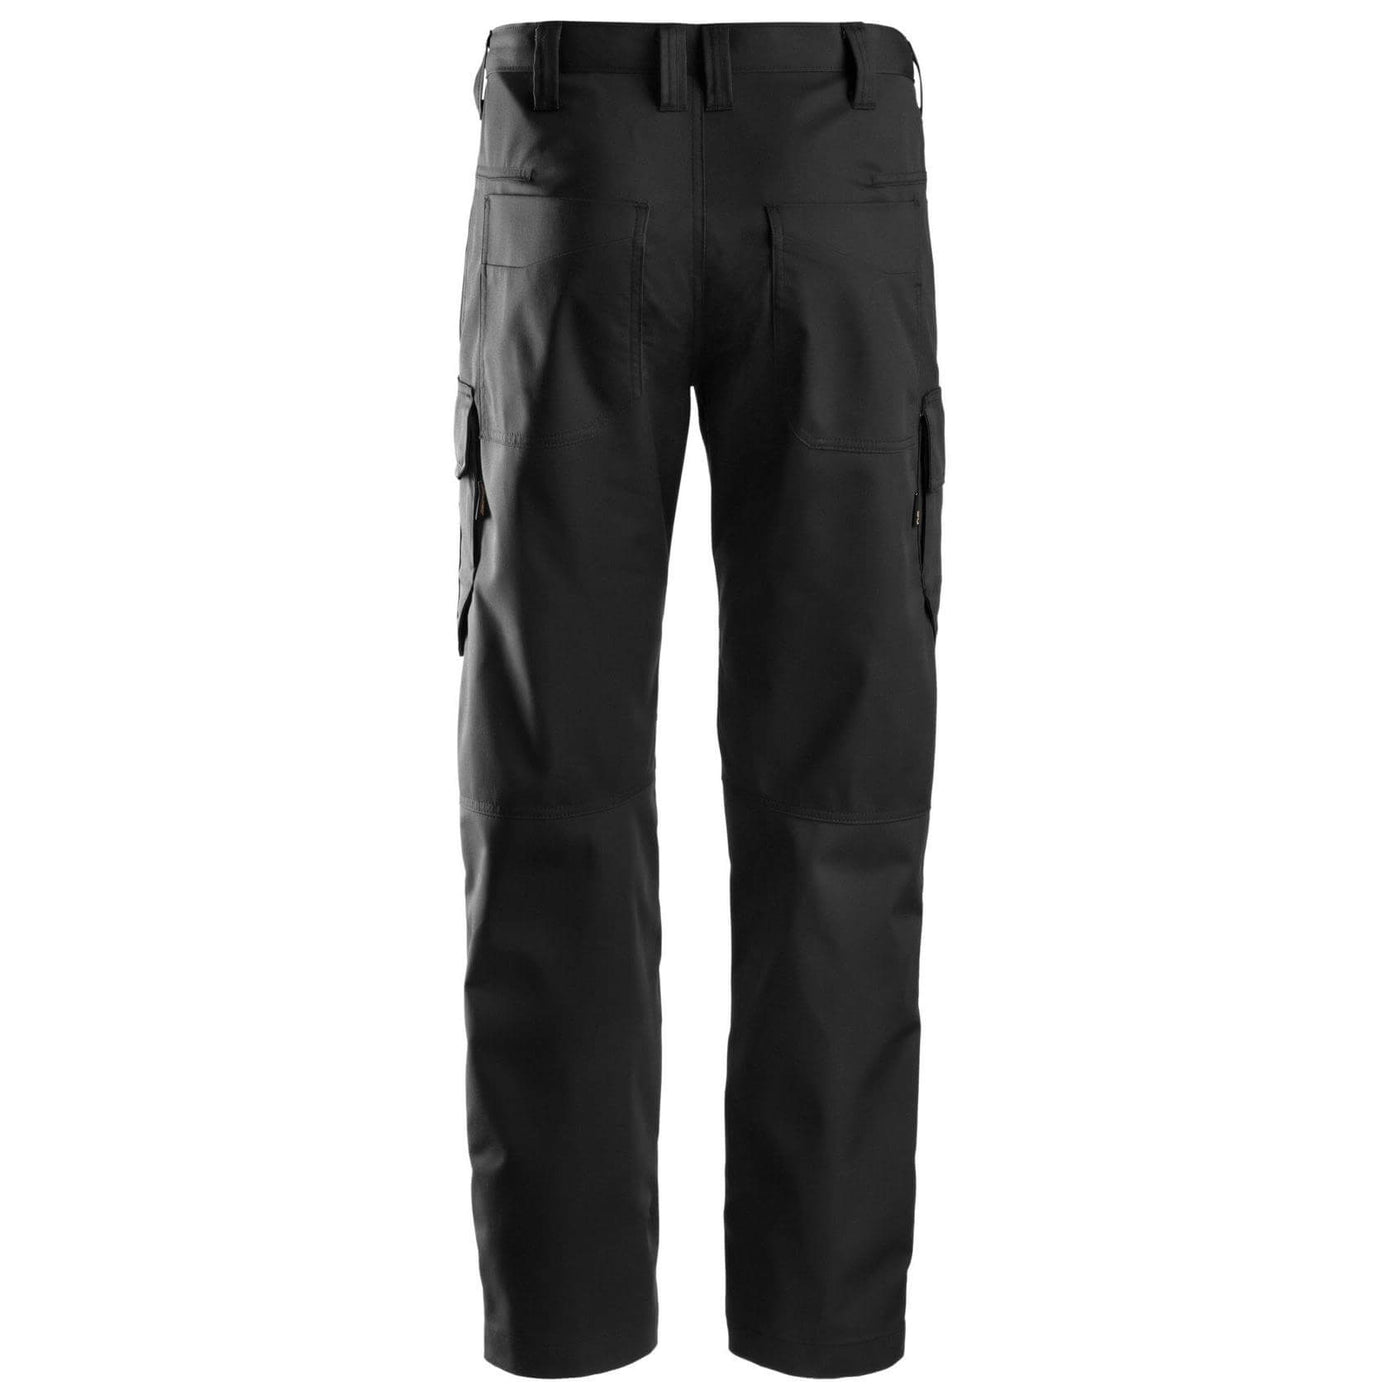 Snickers 6801 Service Trousers with Knee Pad Pockets Black Black back #colour_black-black